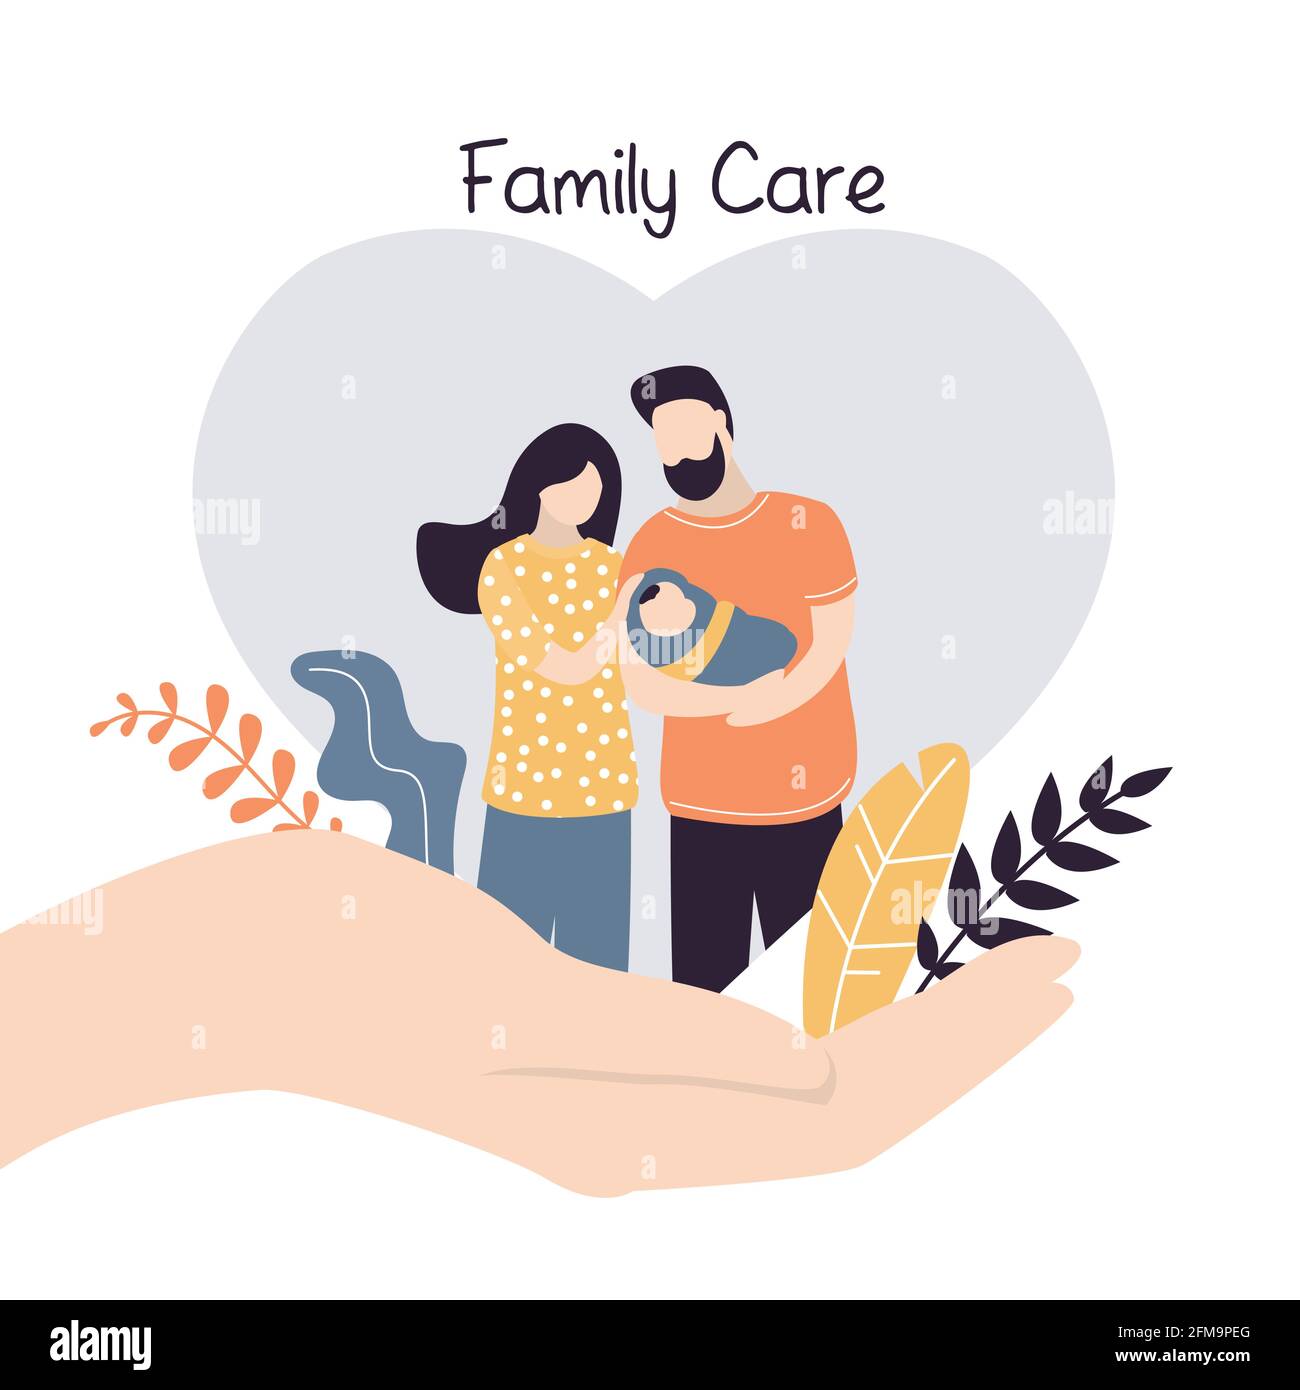 Insurance and healthcare concept background. Big hand hold tiny young love couple with newborn baby. Medical or financial assurance,family care banner Stock Vector